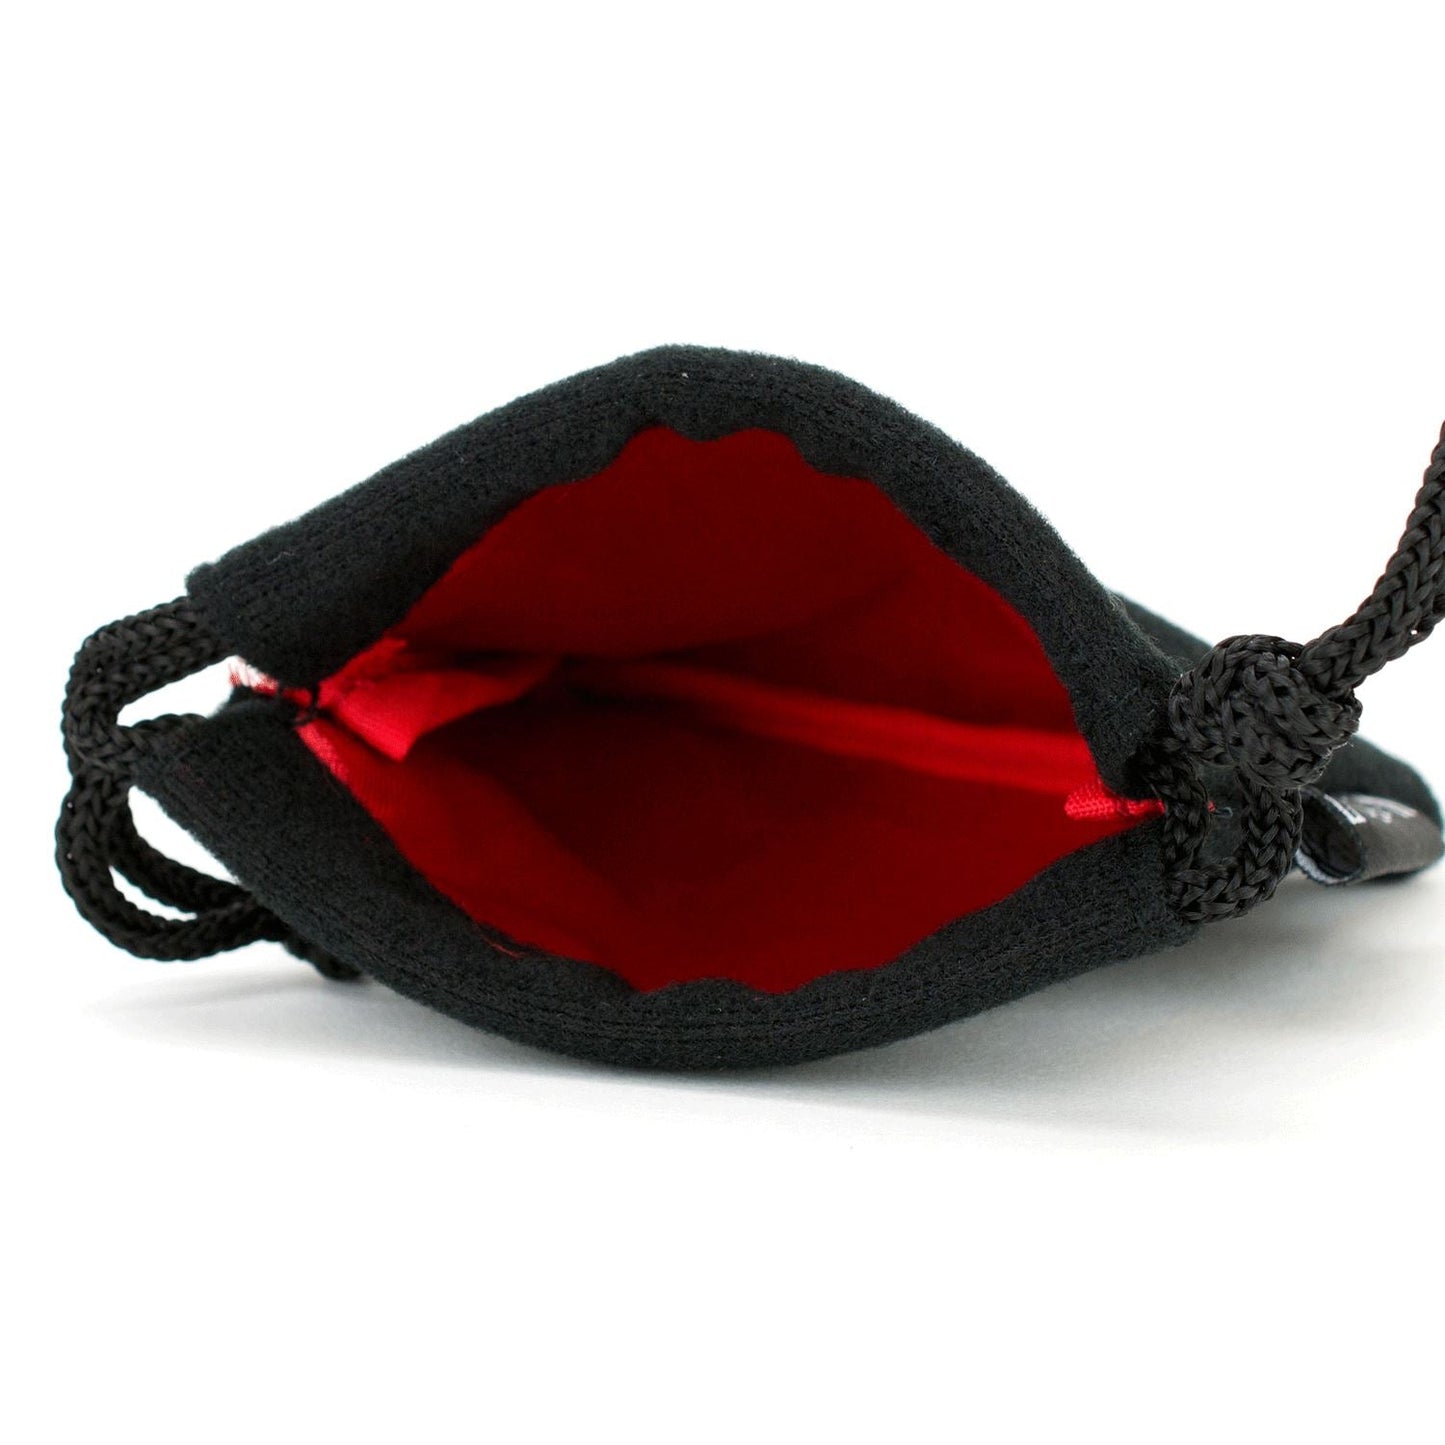 Small Dice Bag 3.75x4 - Black Velvet Exterior, Satin Non-Rip Liner - Multiple Colors Available